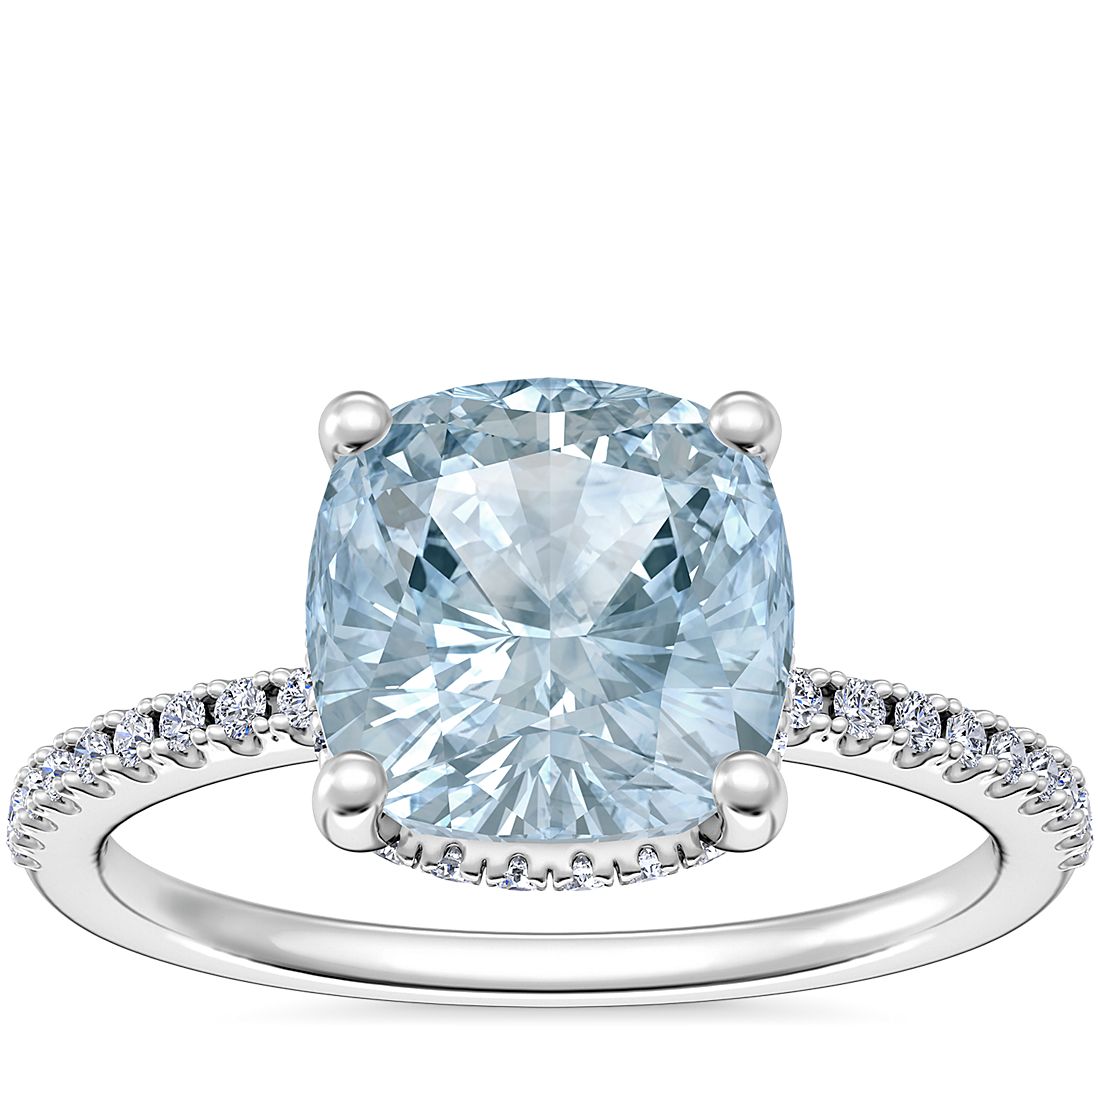 Petite Micropavé Hidden Halo Engagement Ring with Cushion Aquamarine in 14k White Gold (8mm)